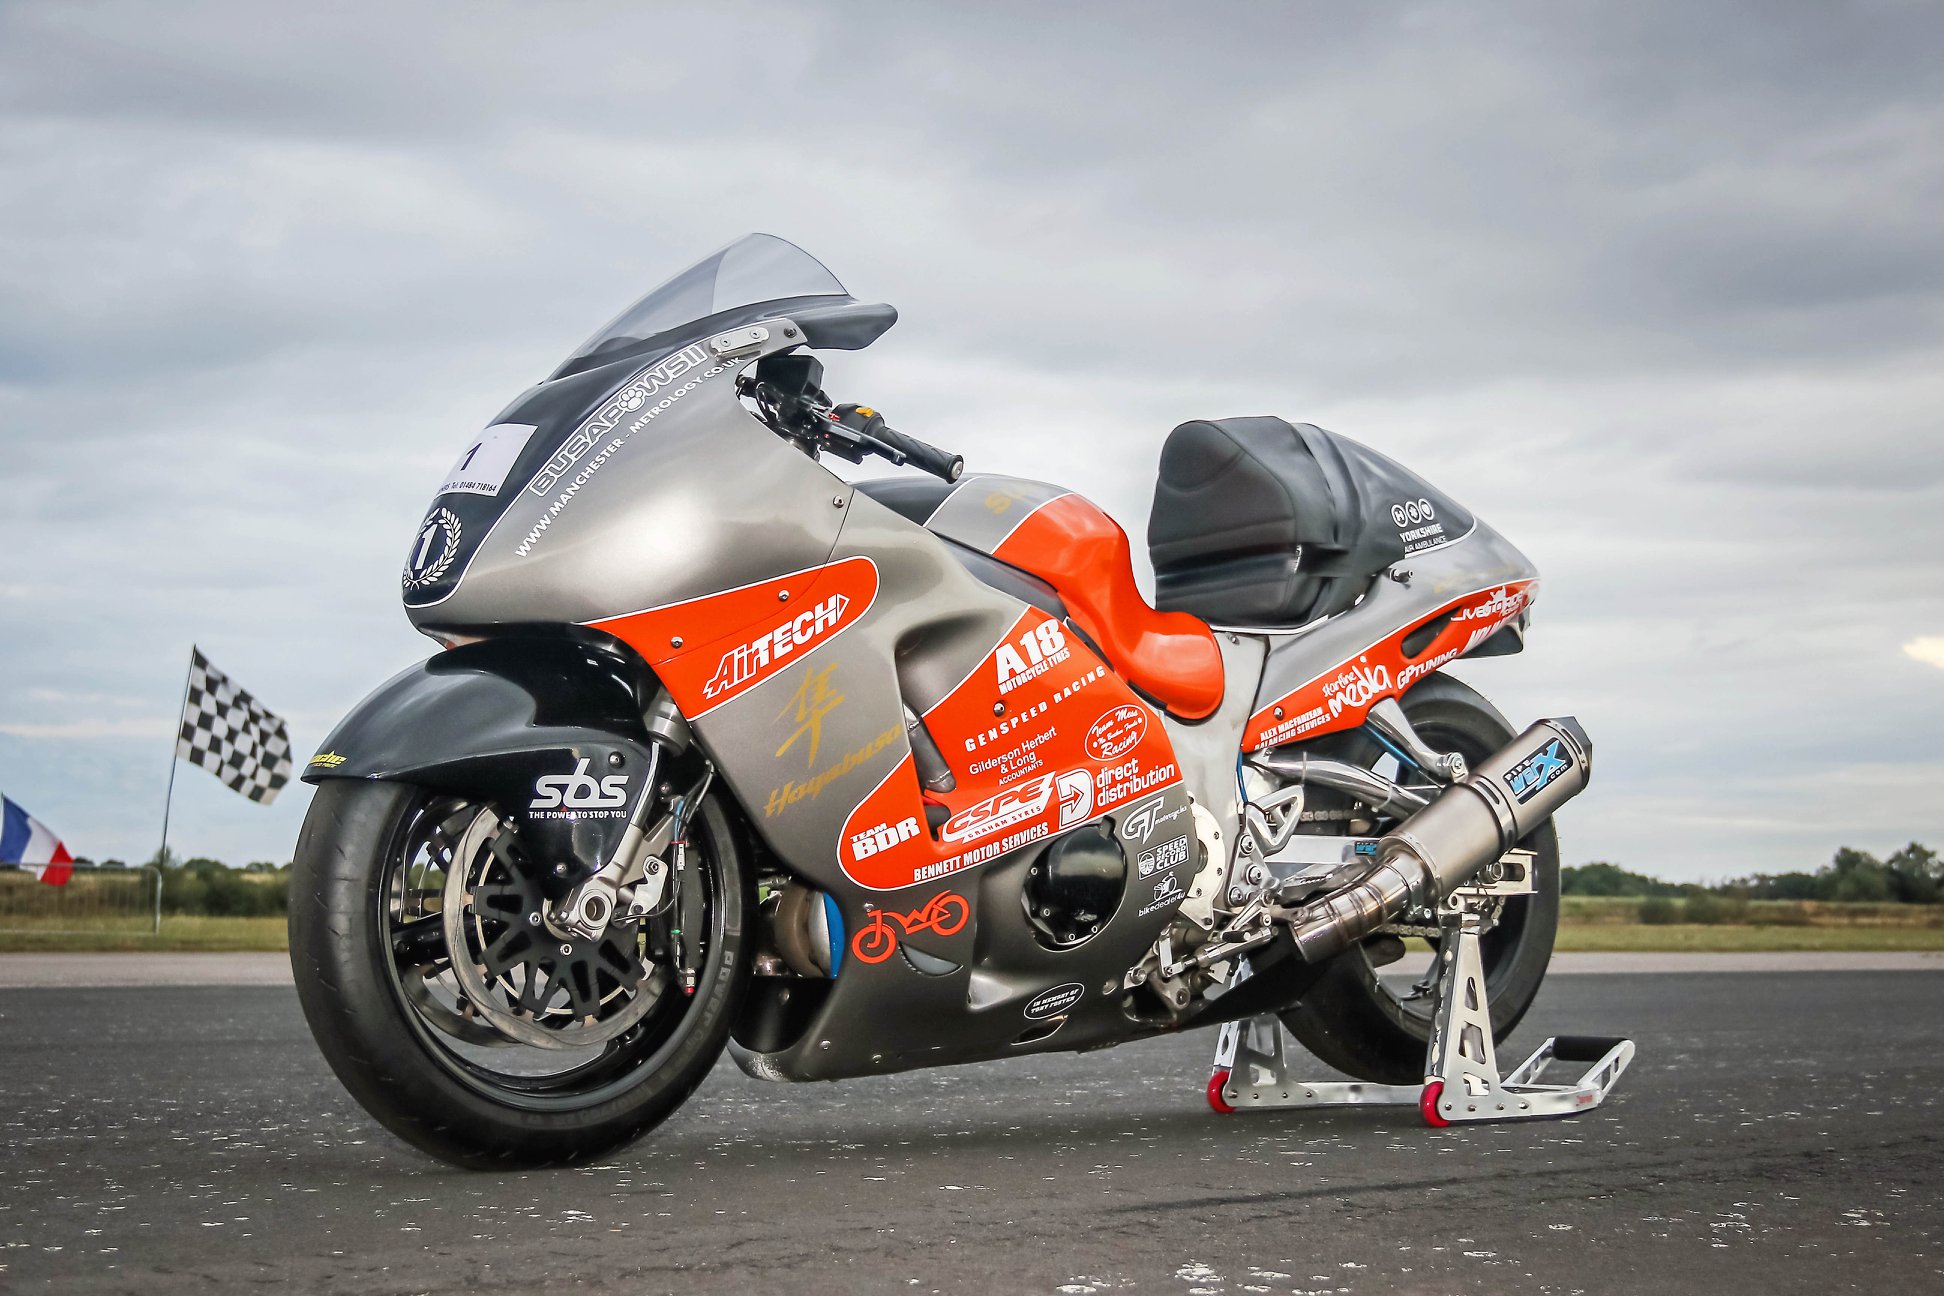 Turbocharged Hayabusa for sale 650hp & 264mph DriveMag